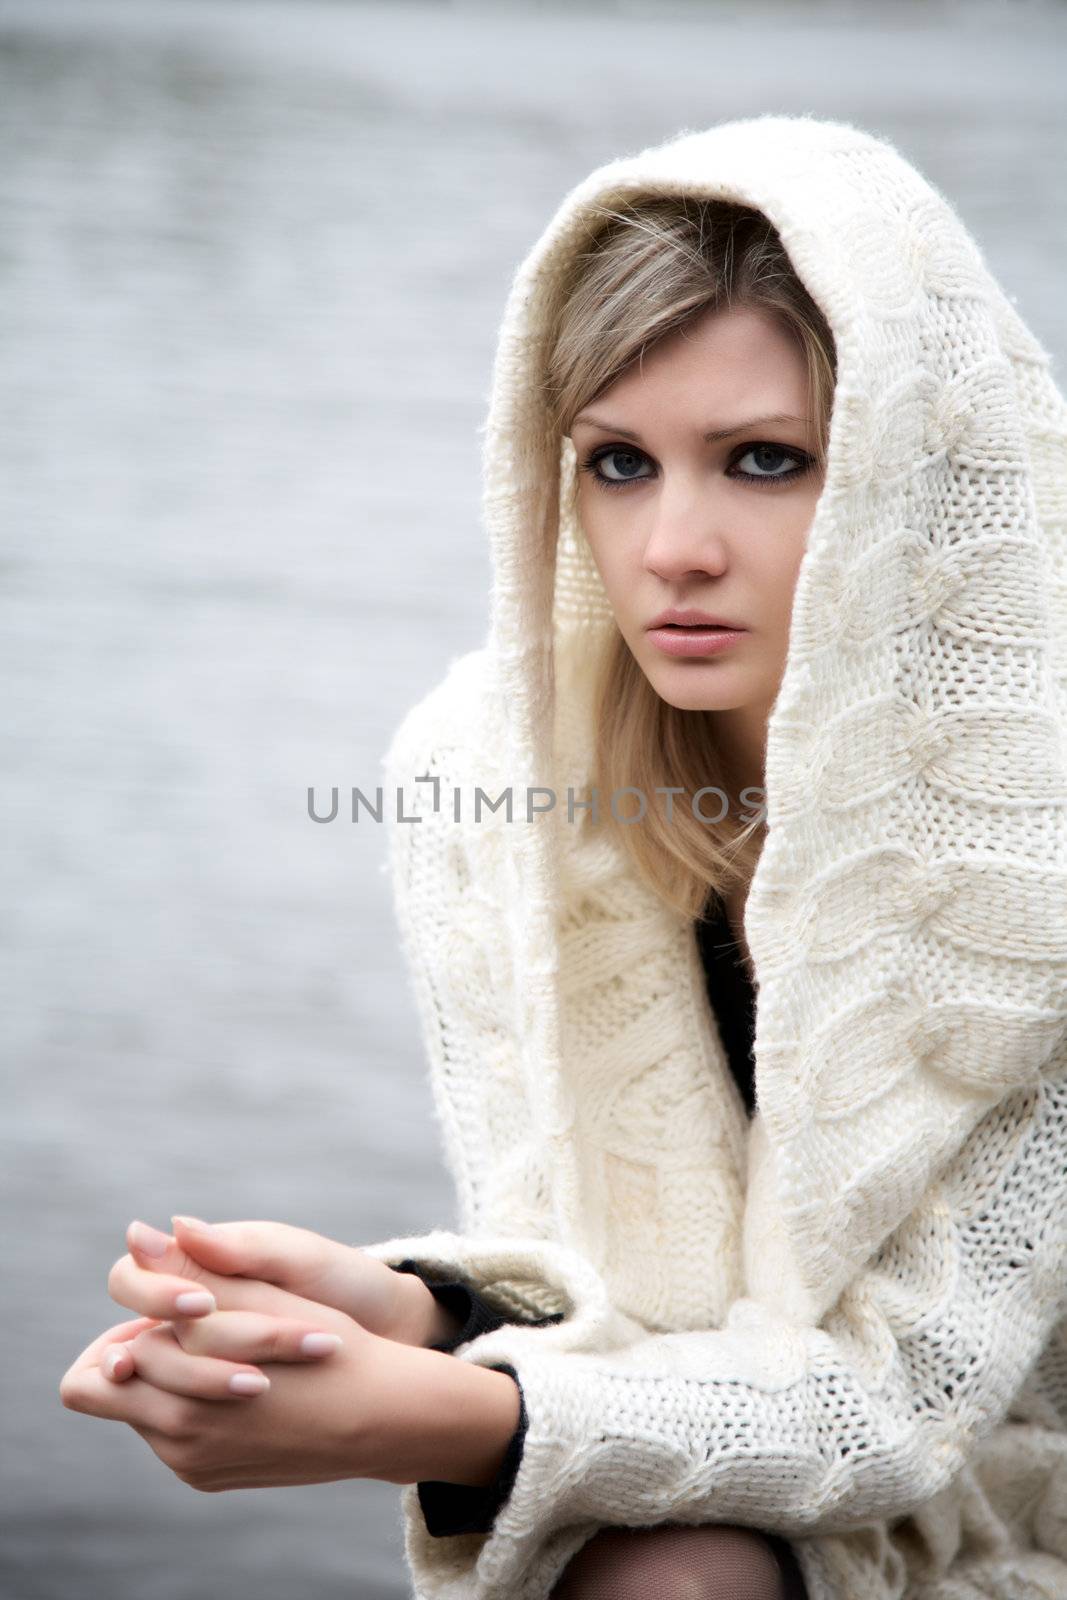 The beautiful girl in a dress with a hood against  river